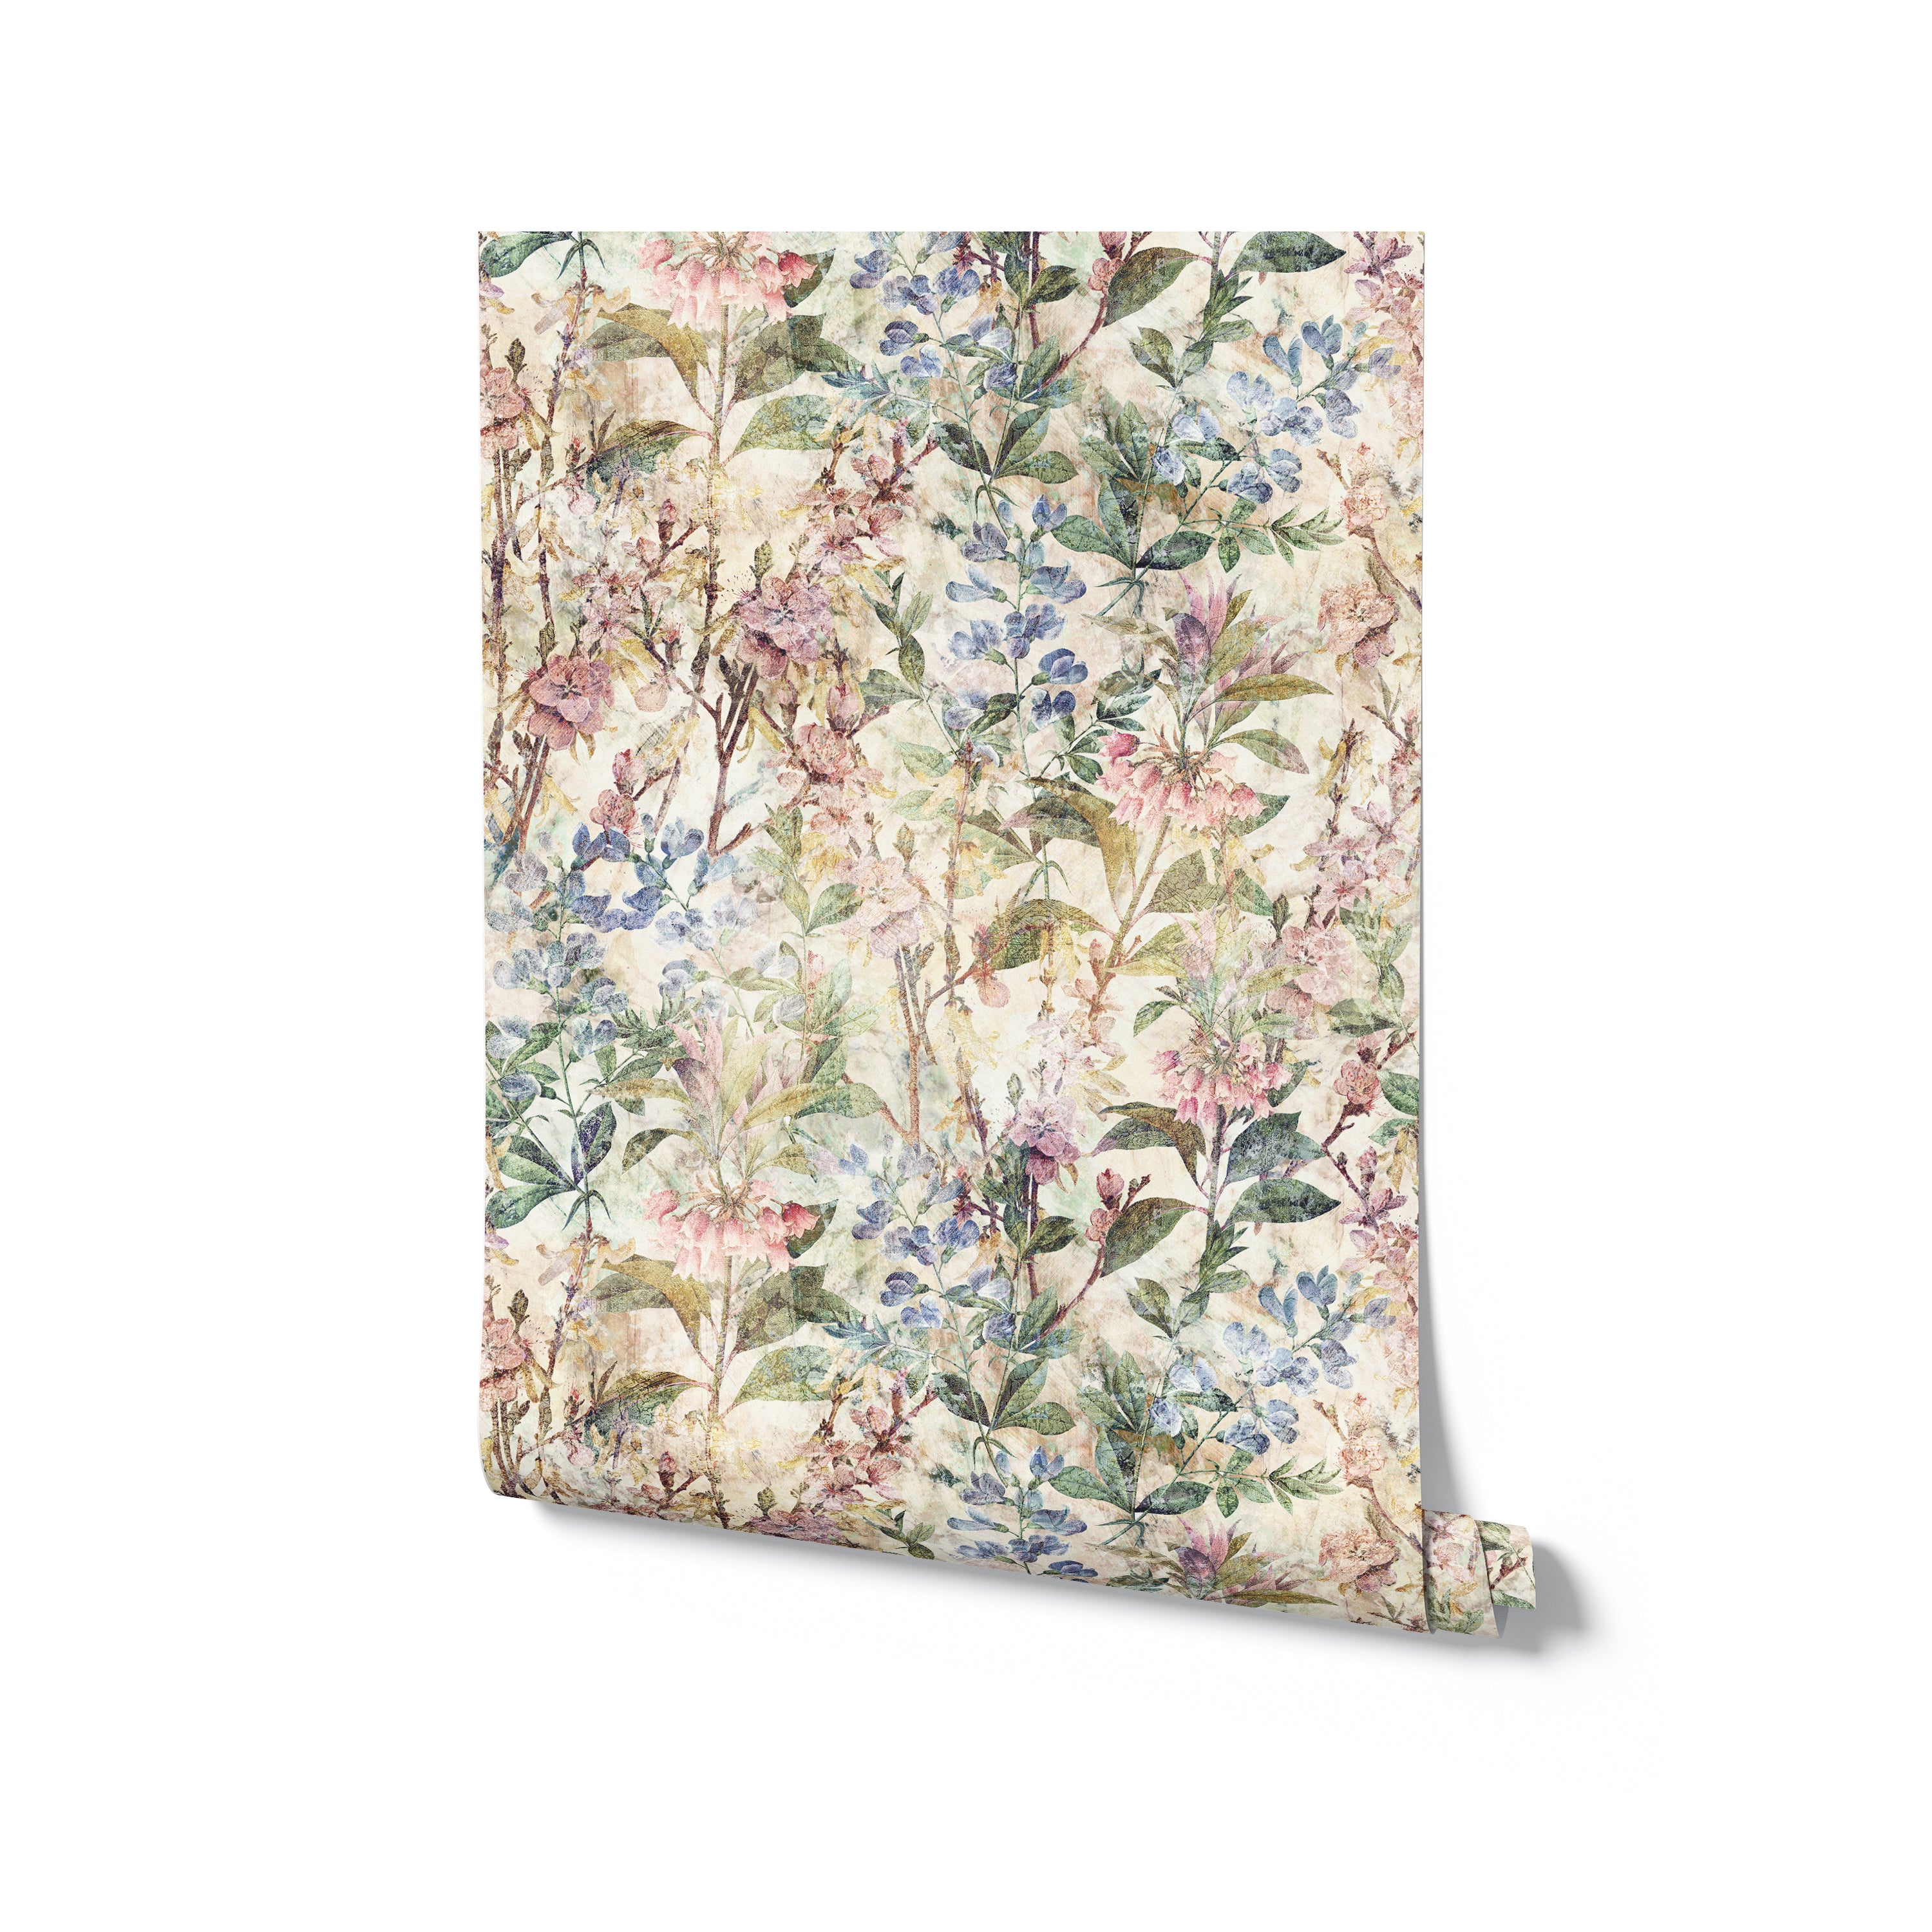 A rolled-up sample of the "Ancient Florals Wallpaper," displaying a lush arrangement of botanical illustrations with a soft color palette of greens, pinks, and blues, ideal for adding a touch of elegance and nature-inspired beauty to any space.